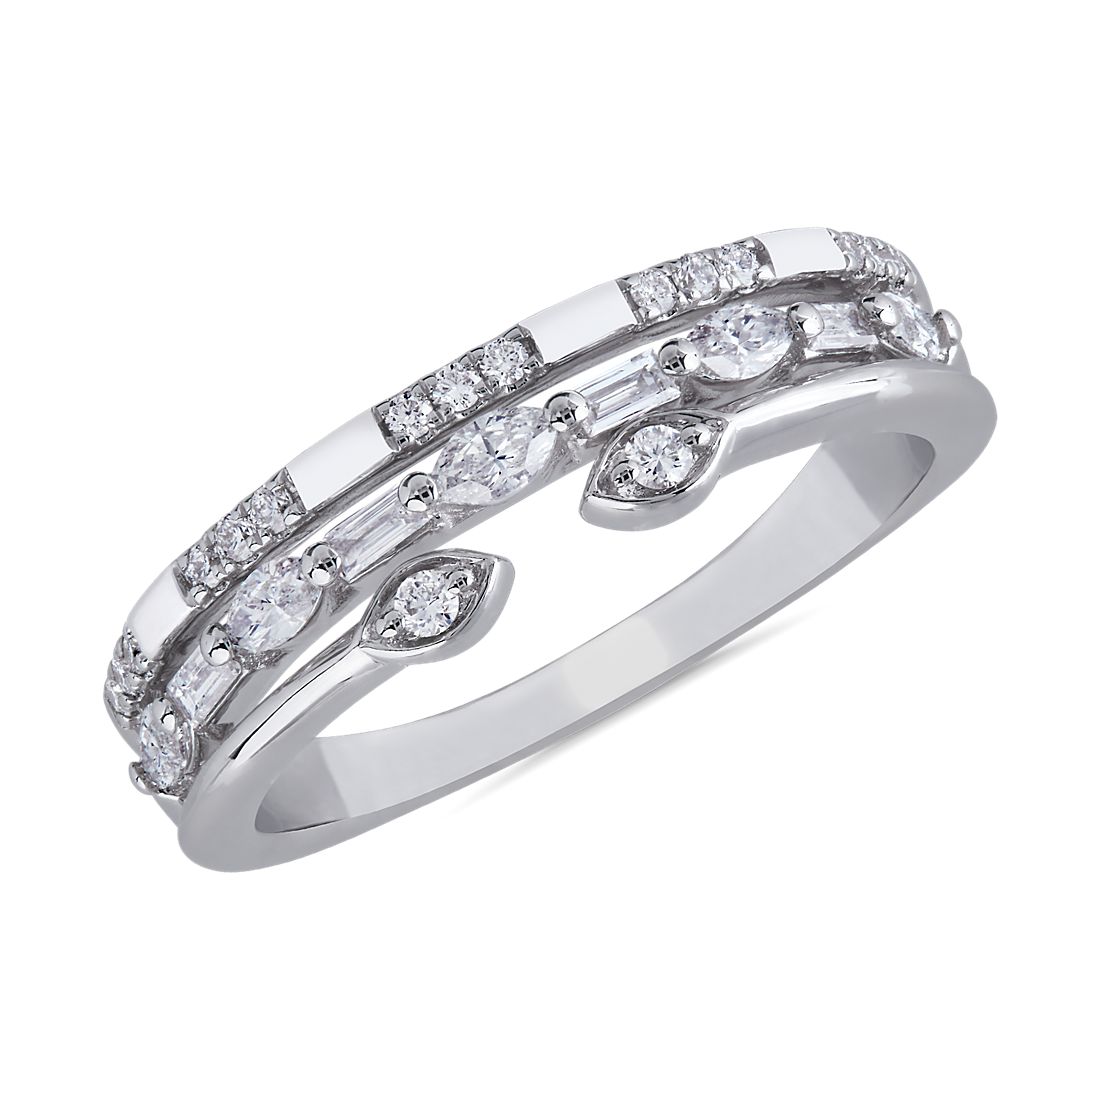 Three Row Marquise Diamond Stacking Ring in 14k White Gold (0.29 ct. tw.)